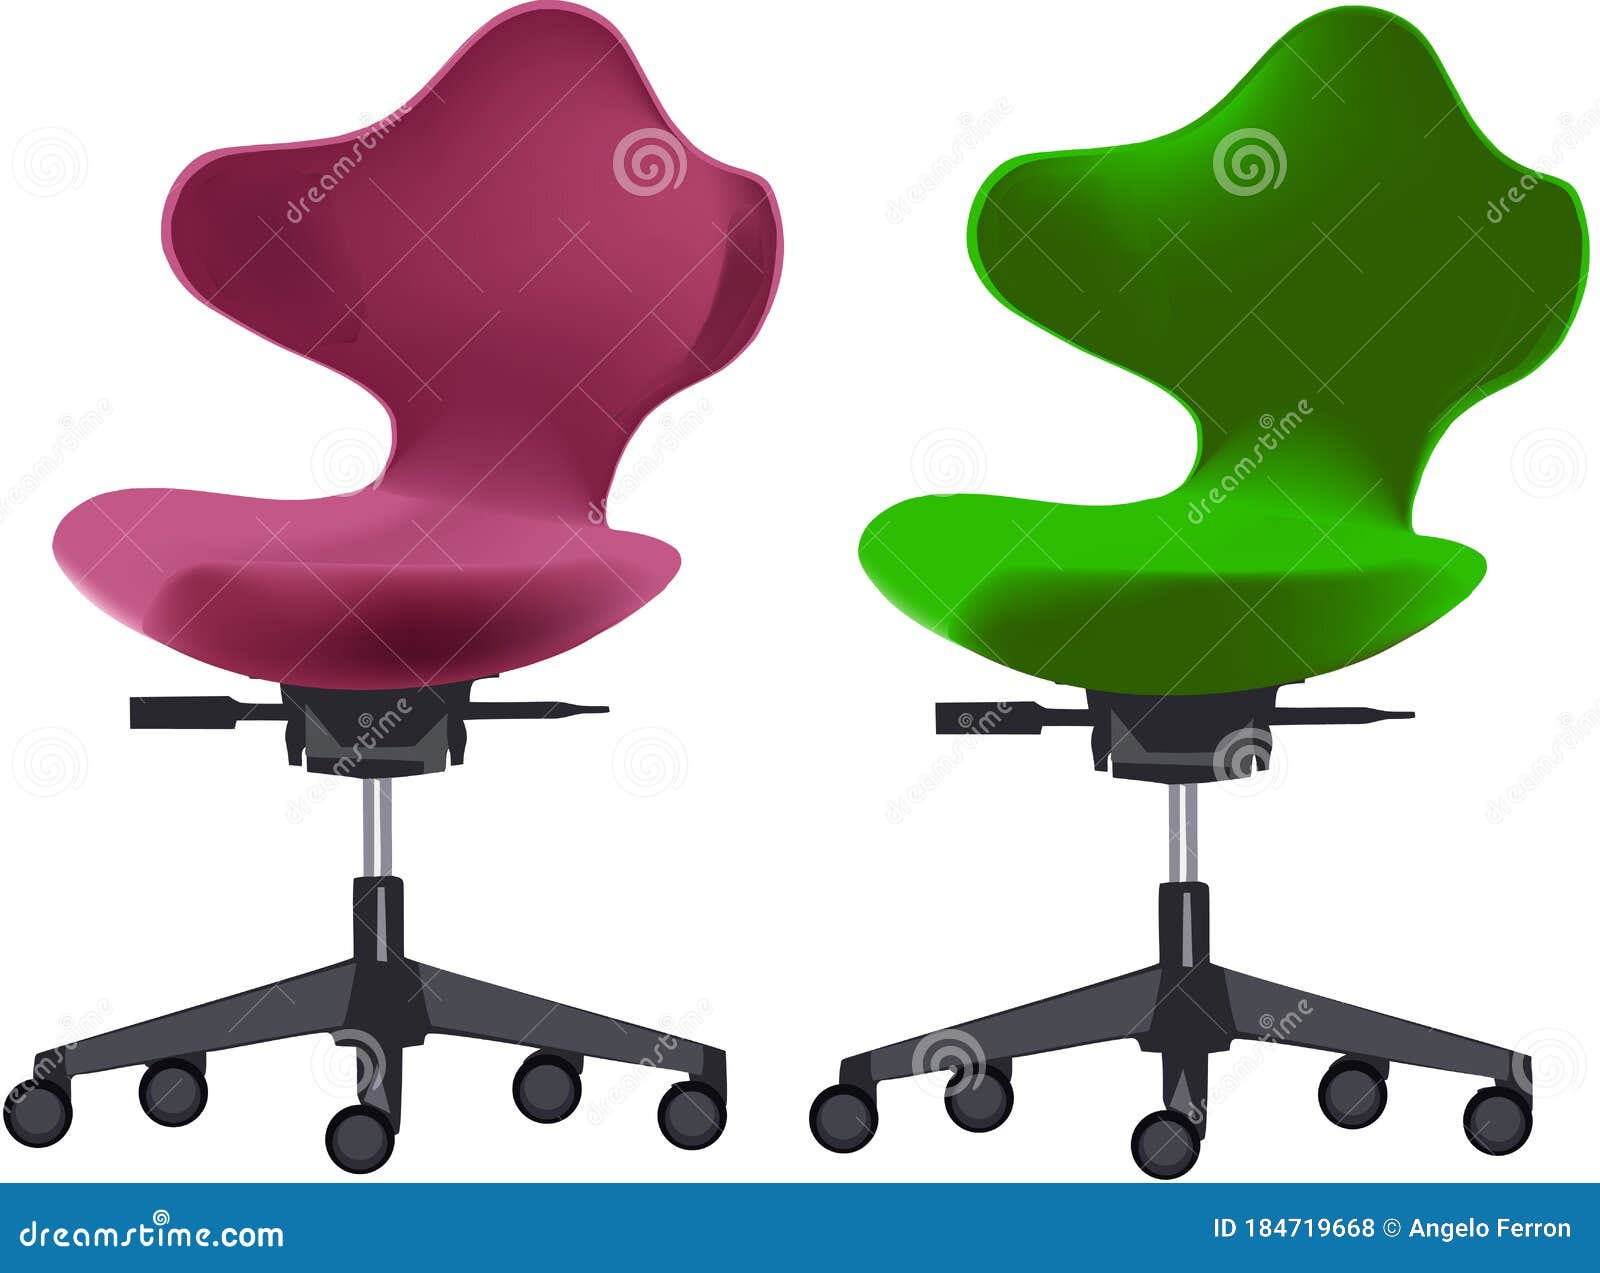 colorful chairs with anatomical office wheels